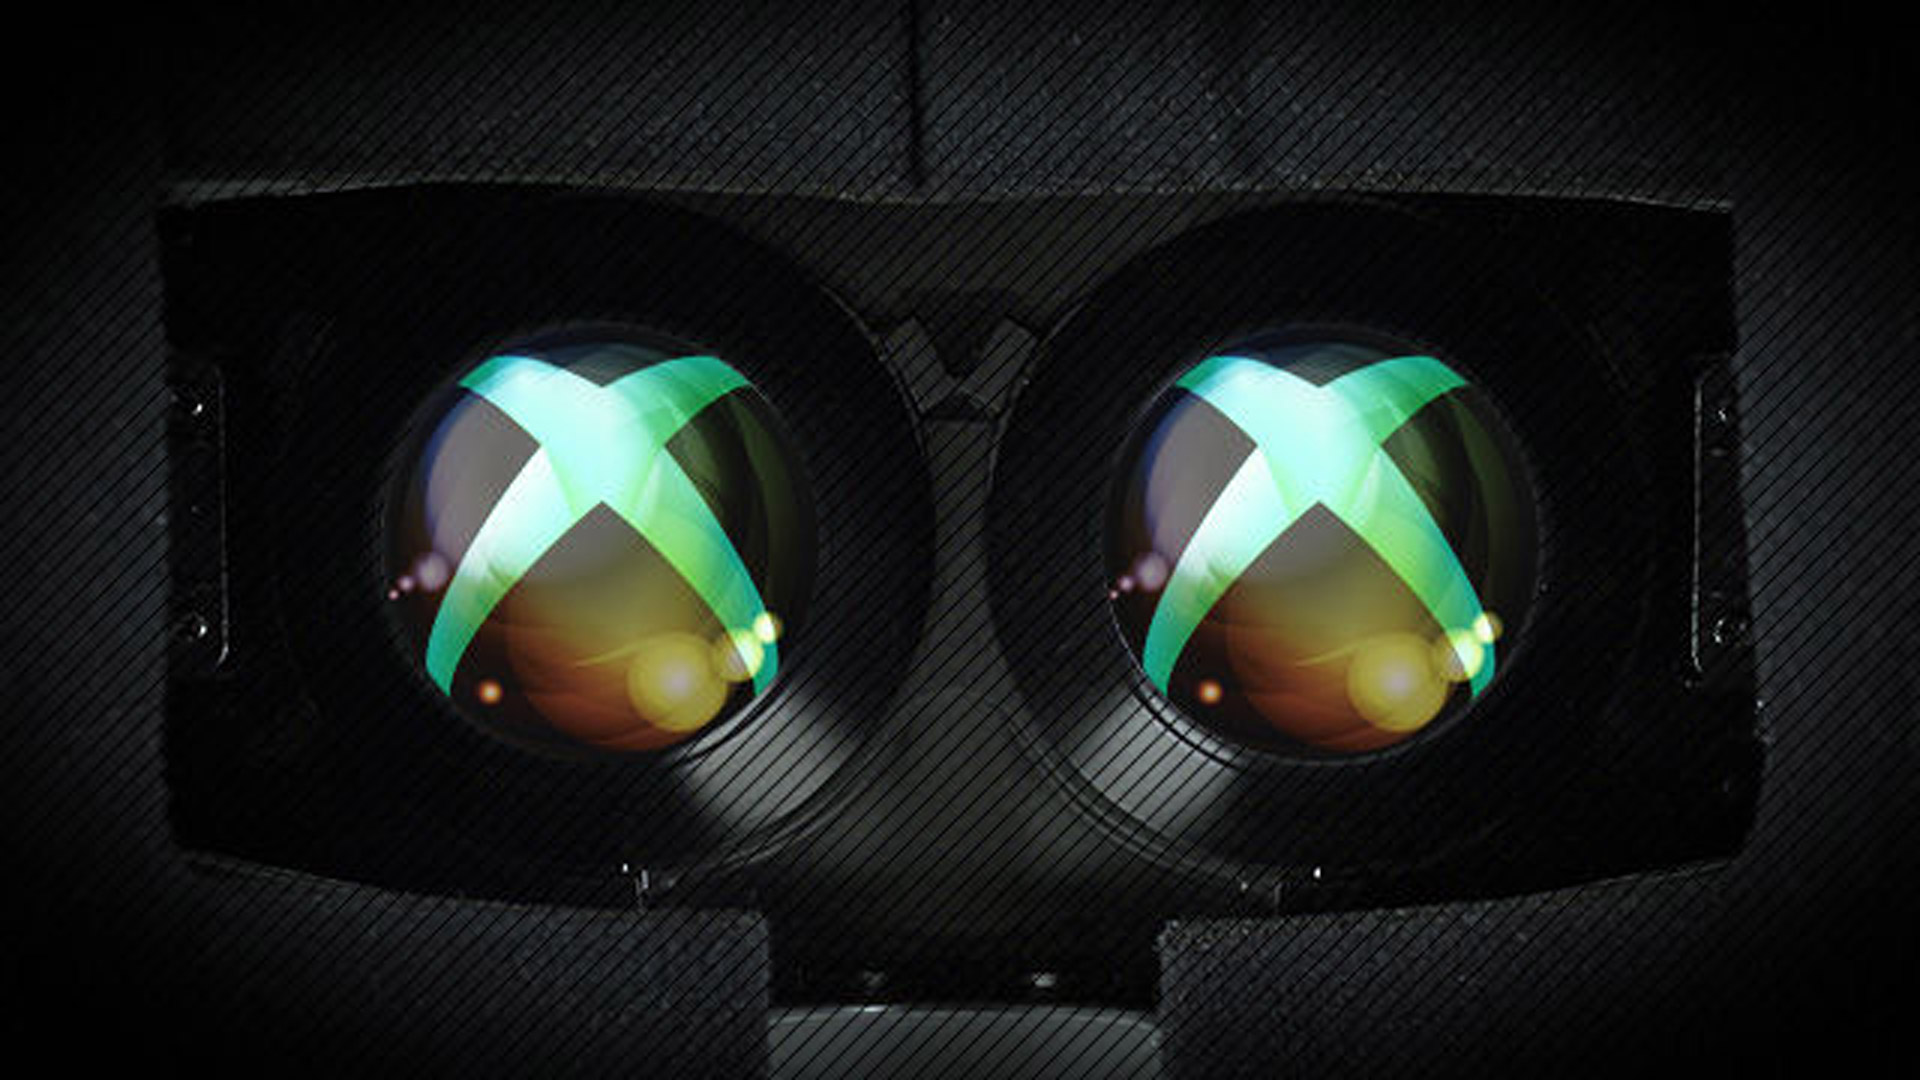 vr headset on xbox one